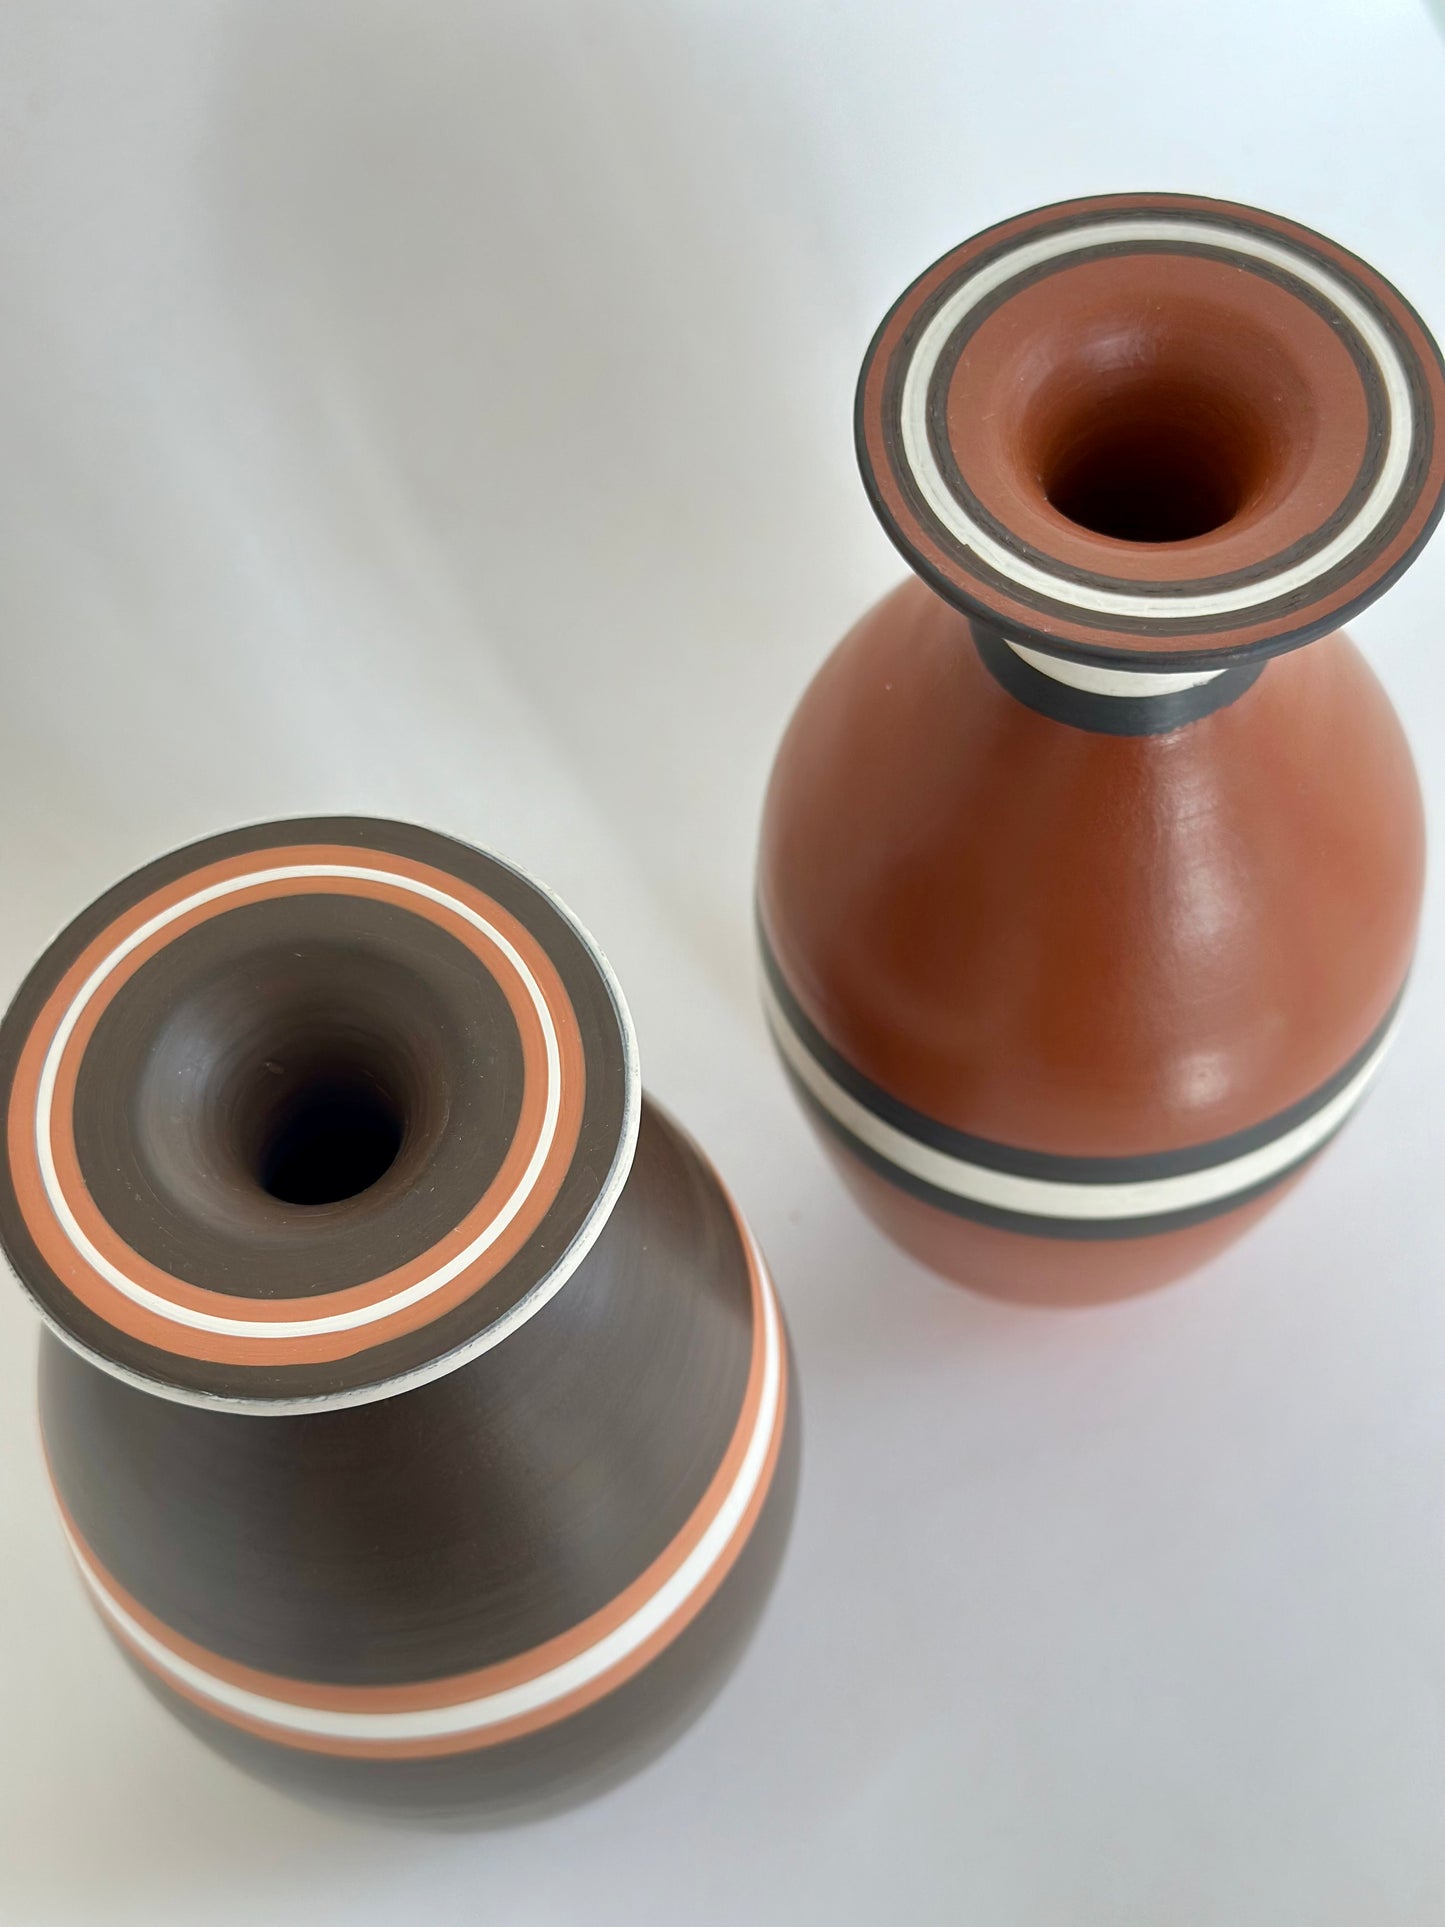 Dark Brown Striped Vase | Pottery by Mike